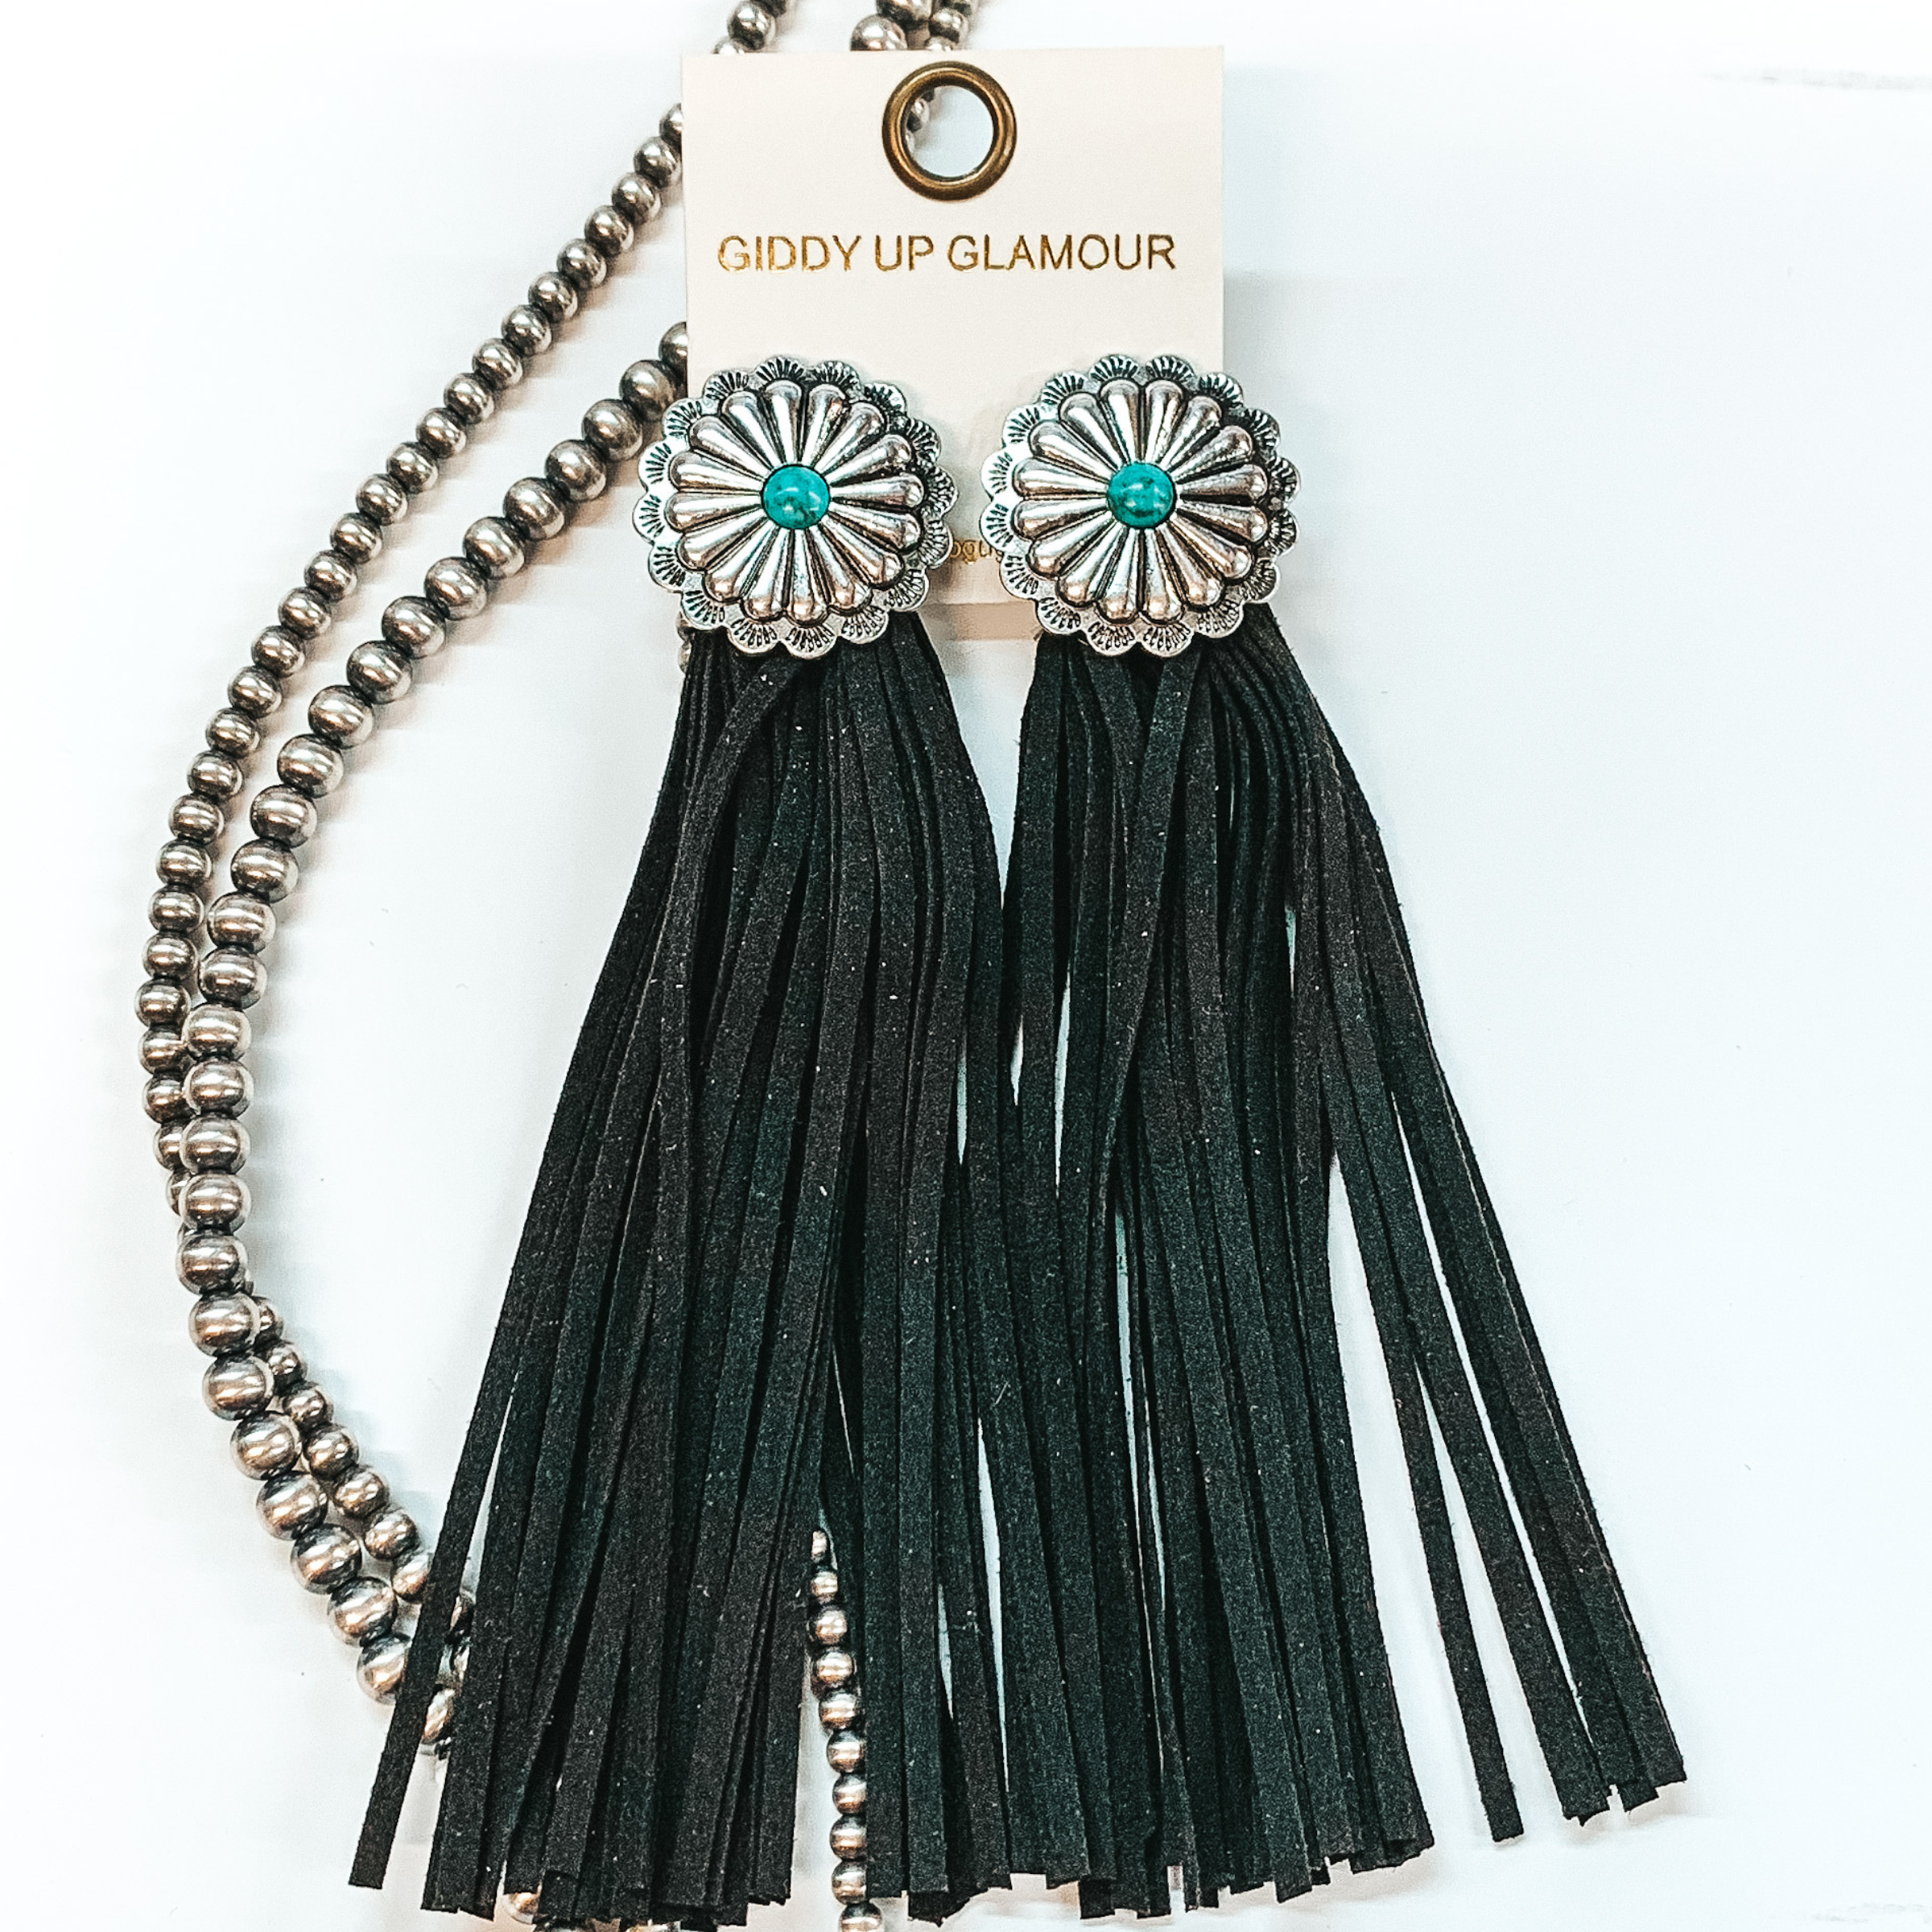 Post back concho earrings with a turquoise stone  in the center with black faux leather tassels. Pictured in a white background with beads as decor.